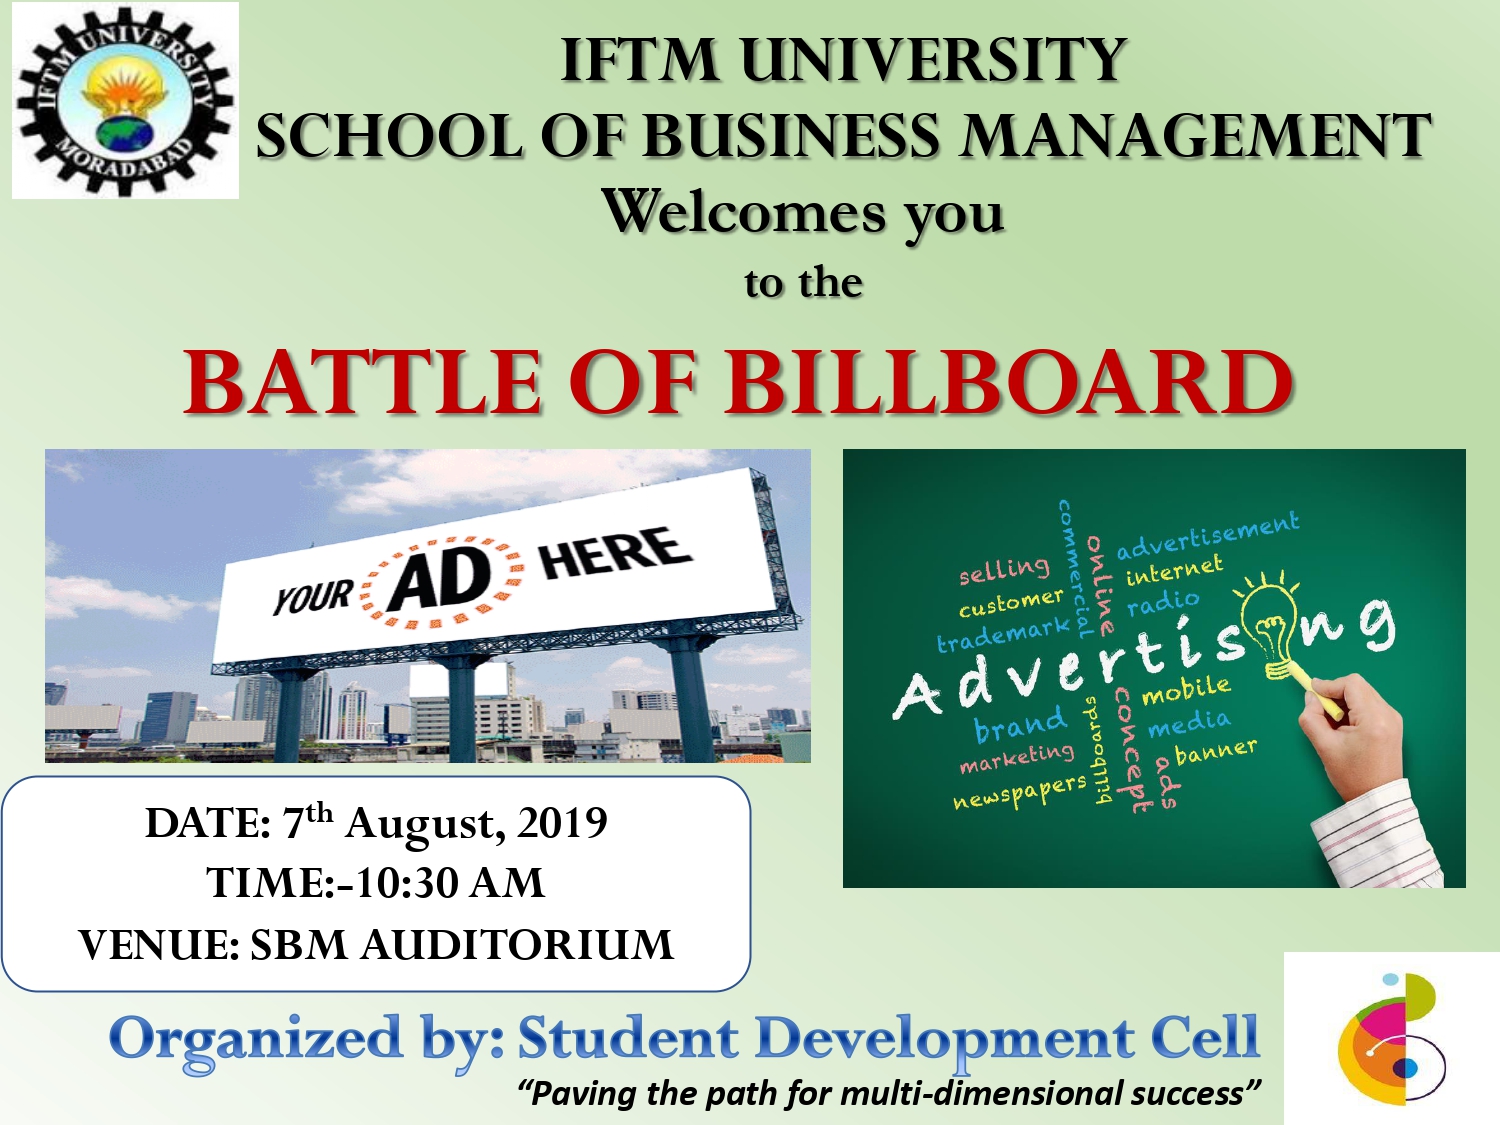 Battle of Billboard (Everything A brand Does Is Advertising)